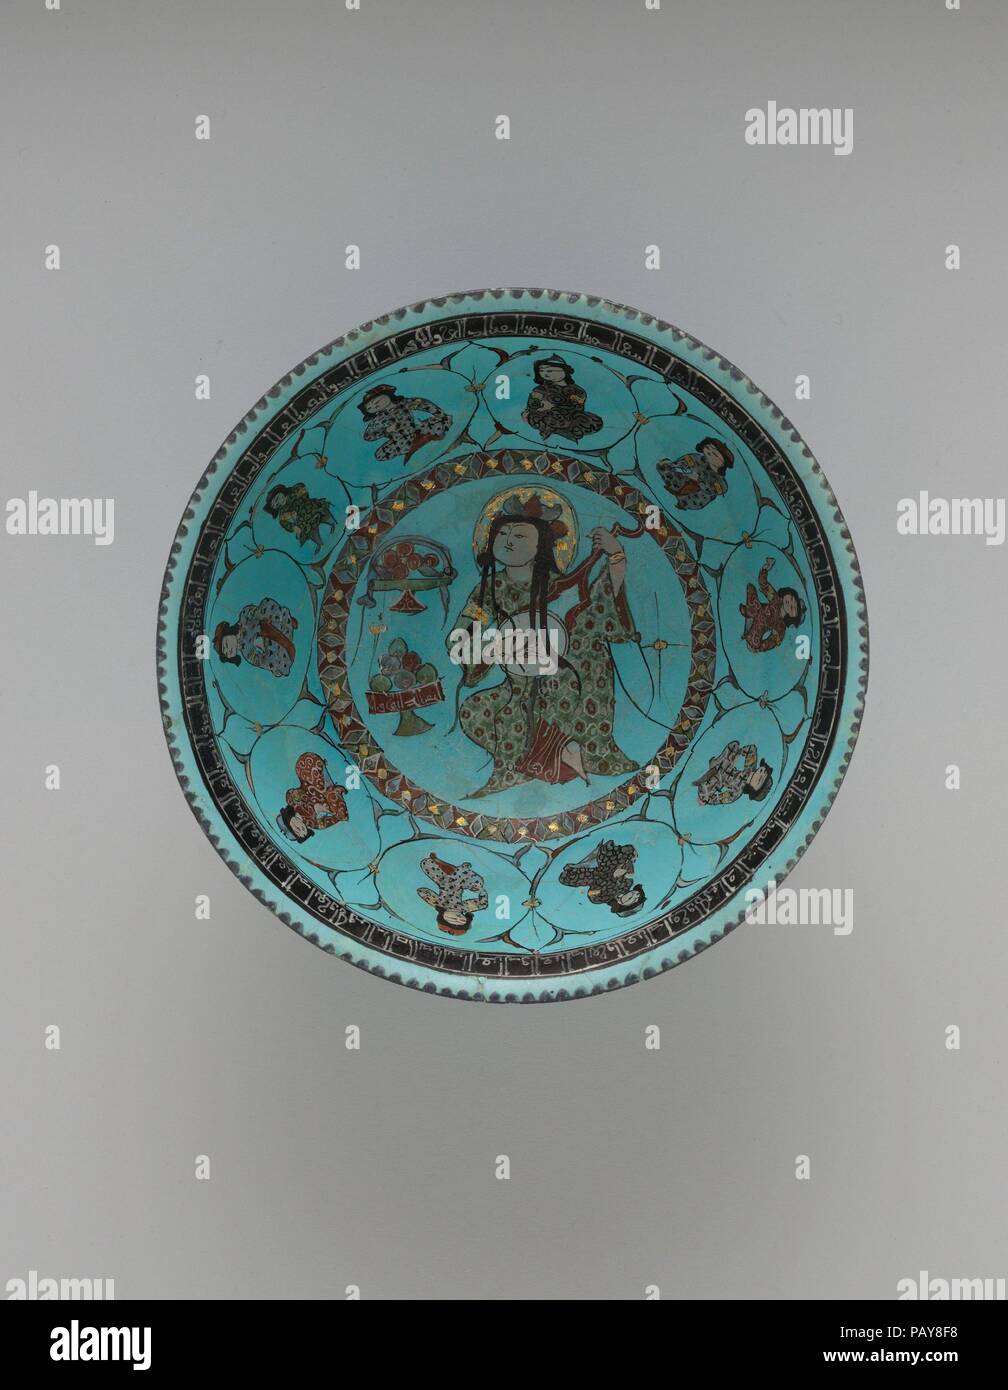 Turquoise Bowl with Lute Player and Audience. Dimensions: H. 3 1/2 in. (8.9 cm)  Diam. 7 3/4 in. (19.7 cm)  Wt. 12.3 oz. (348.7 g). Date: late 12th-early 13th century.  A large assembly with an audience of ten people, or singers, surrounding the 'ud-player is depicted on this turquoise bowl. Bowls of fruit suggest the festive nature of the event. Museum: Metropolitan Museum of Art, New York, USA. Stock Photo